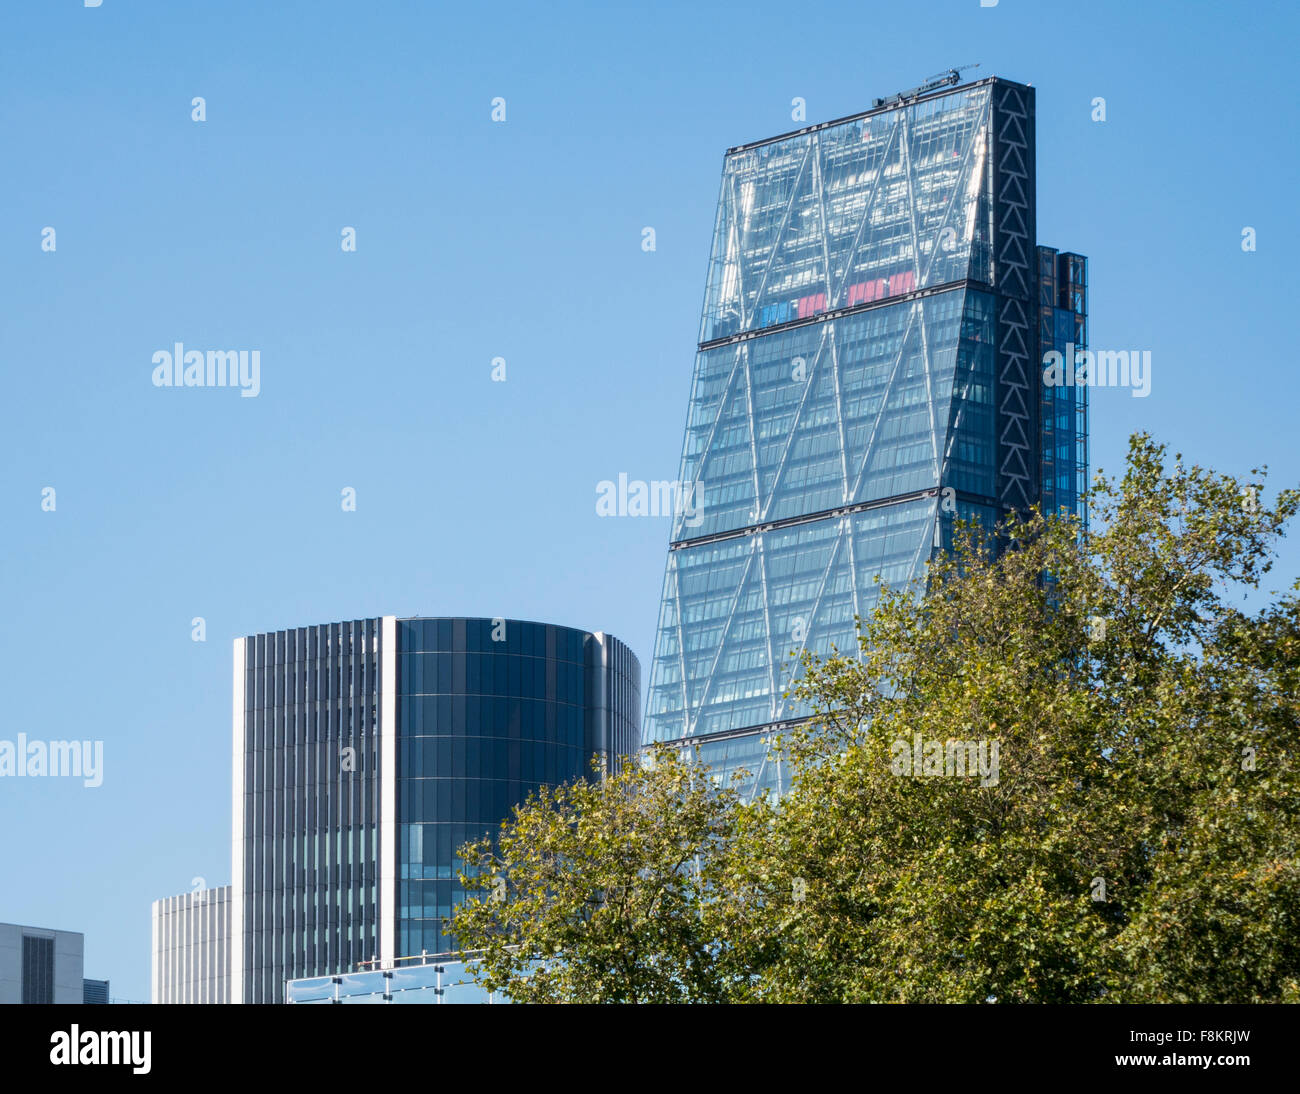 The Cheese Grater or Leadenhall Tower building in London, England Stock Photo